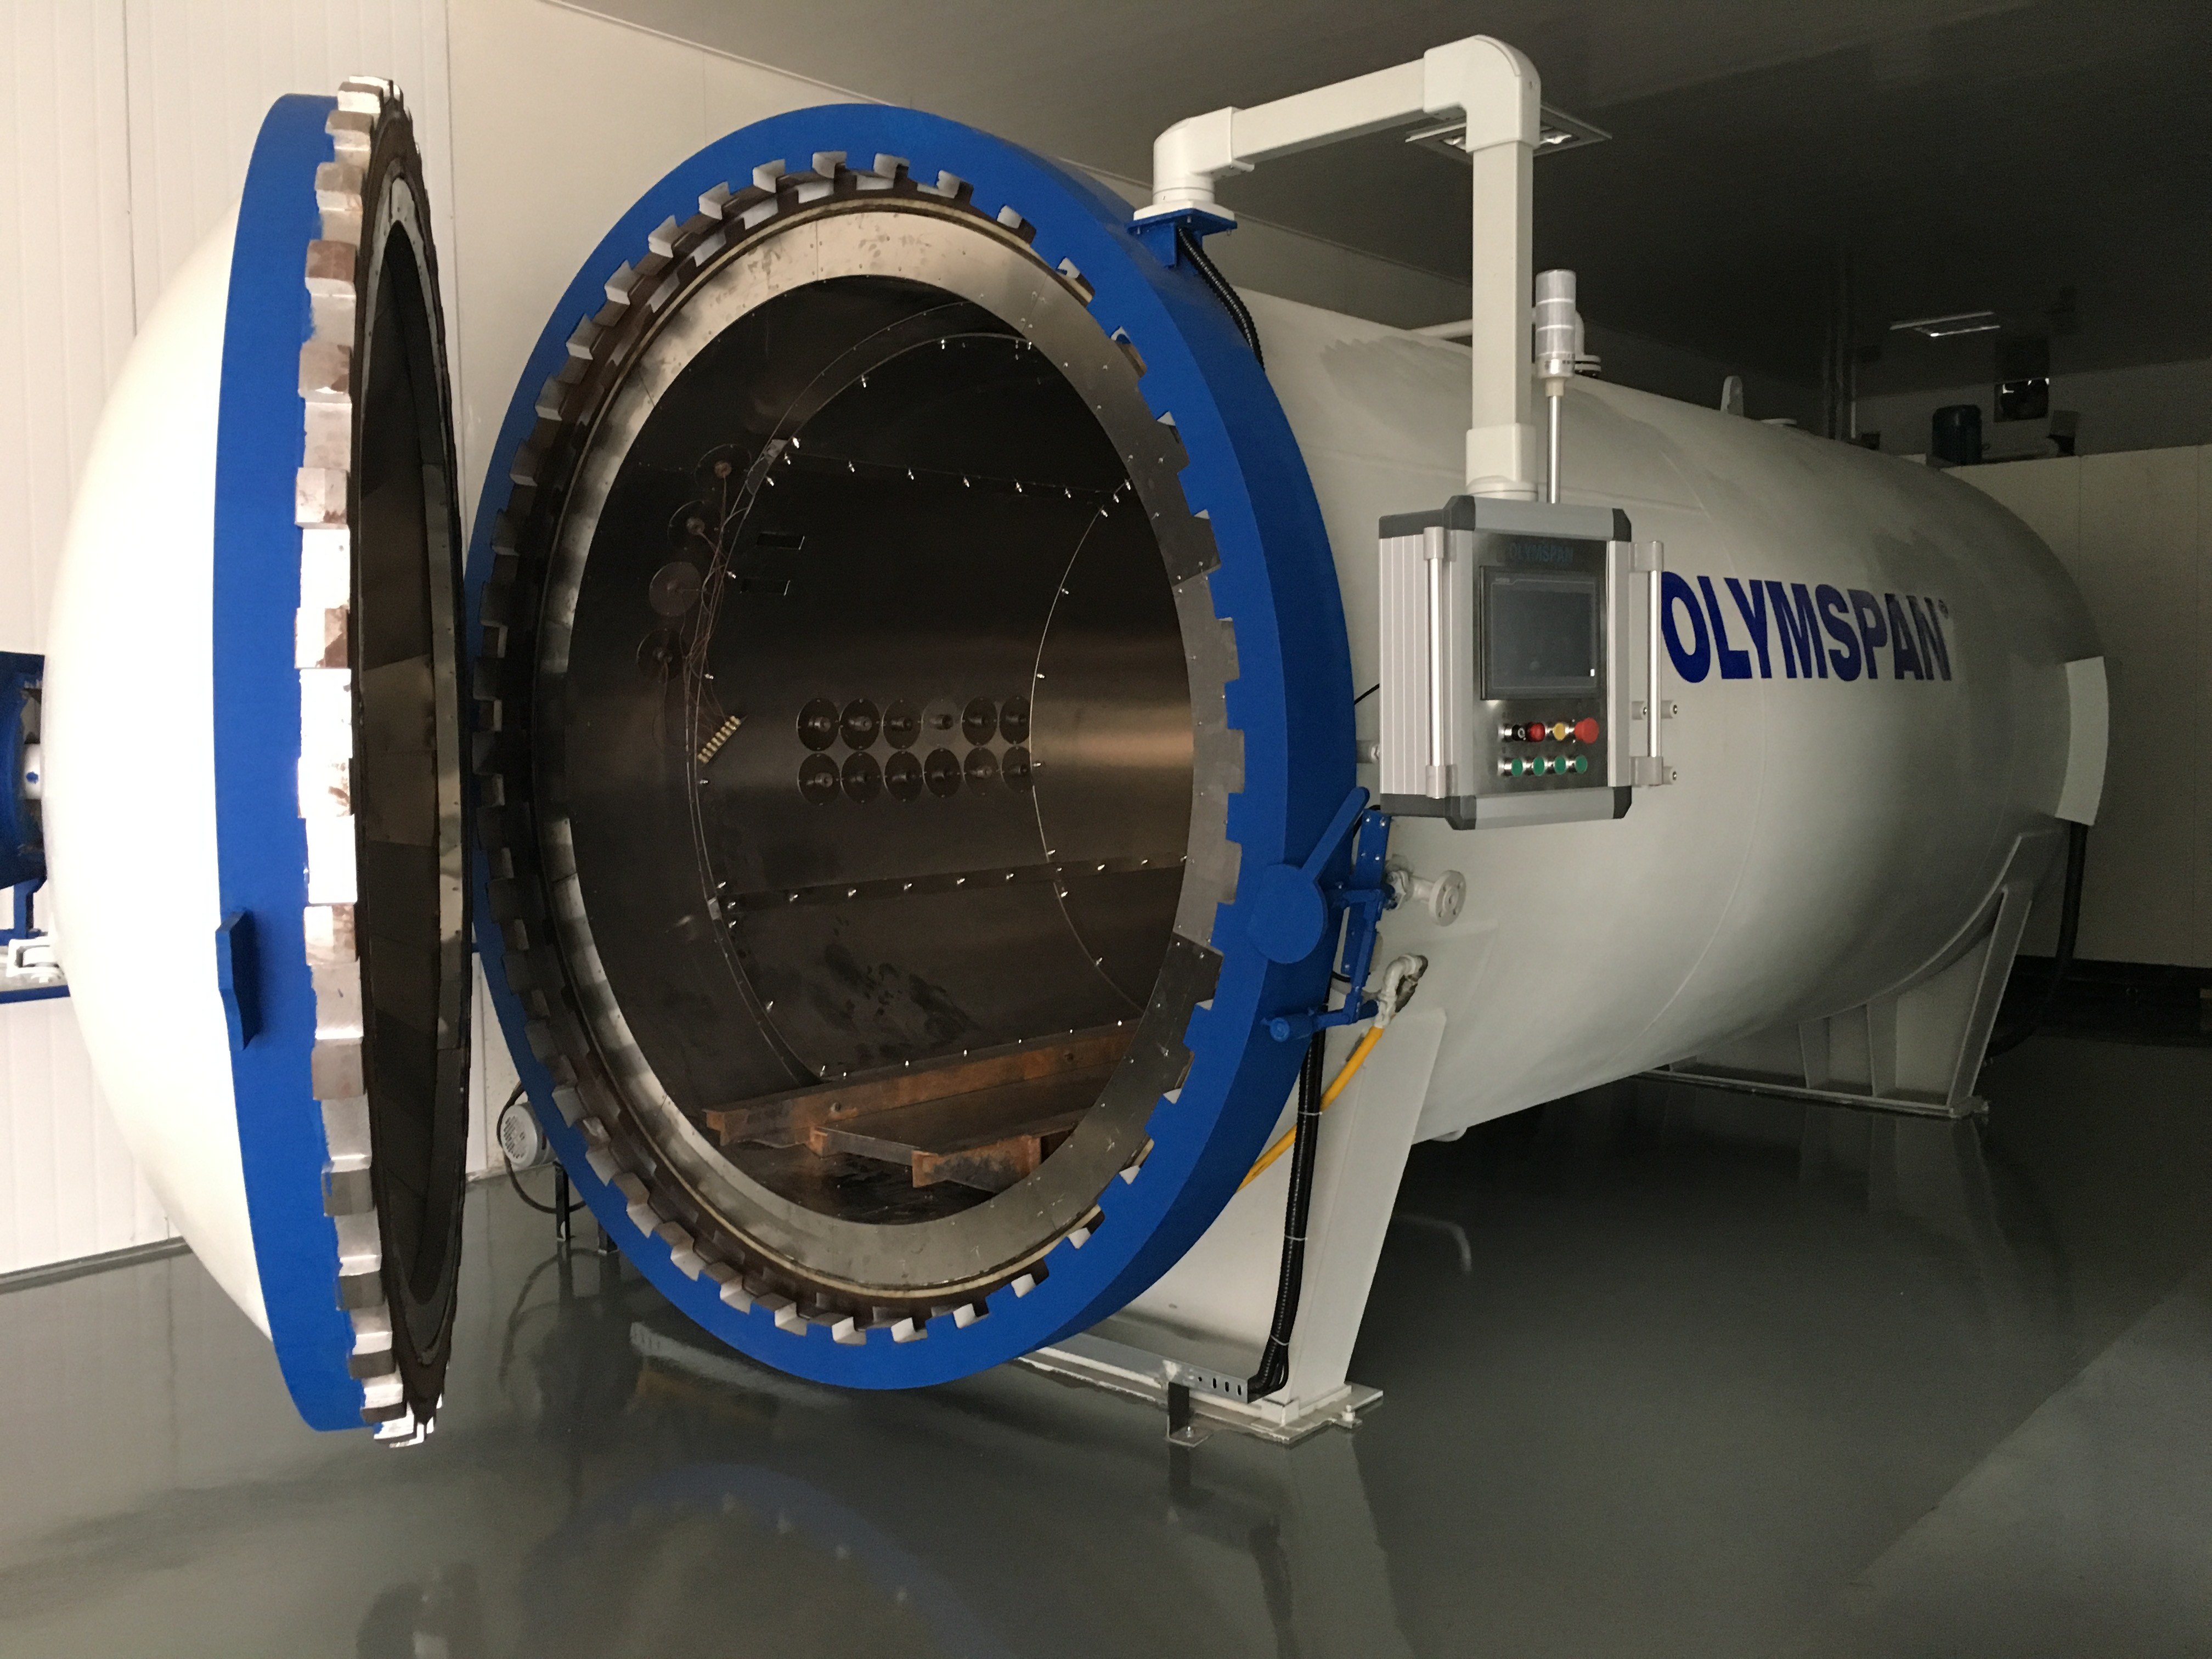  High Performance Industries Composite Autoclave System For Aerospace / Military Materials Manufactures